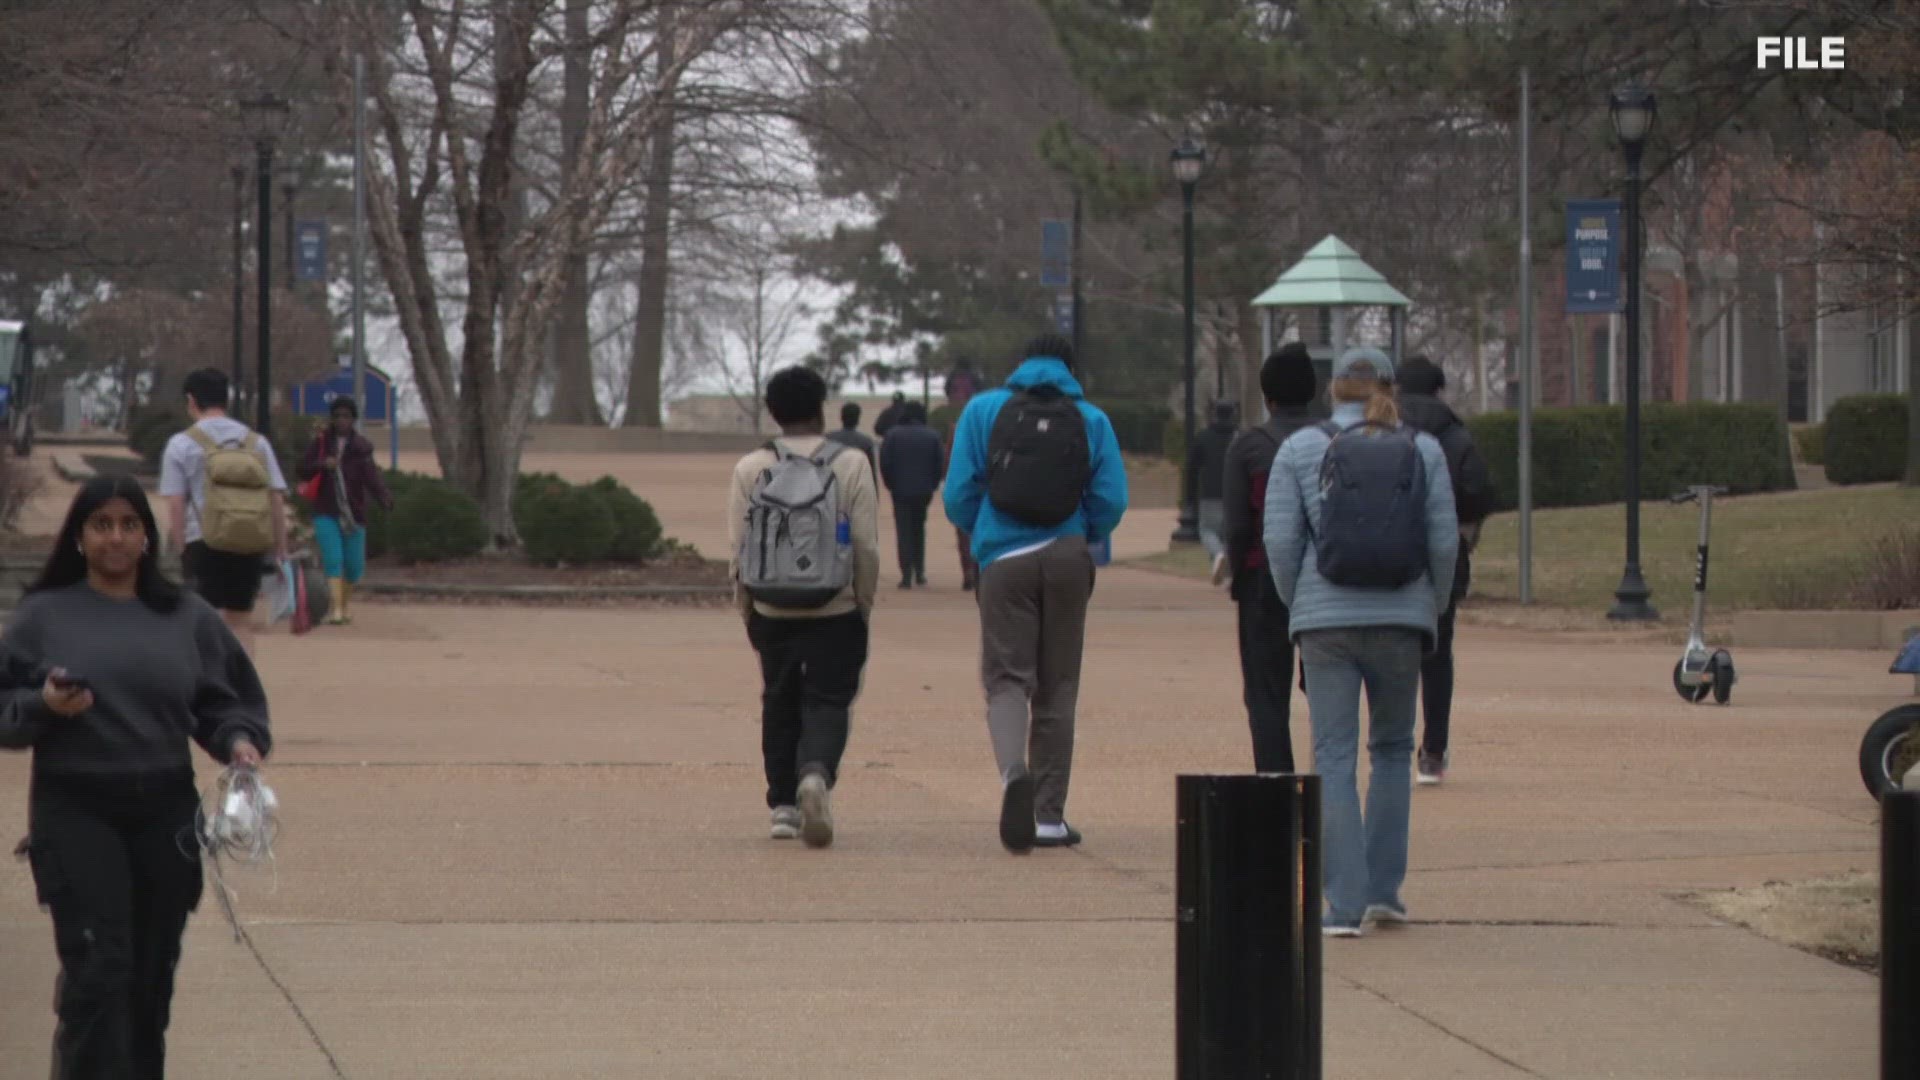 Students are struggling with federal student aid applications this year as the process is plagued by delays. It's all due to a major overhaul of the FAFSA program.